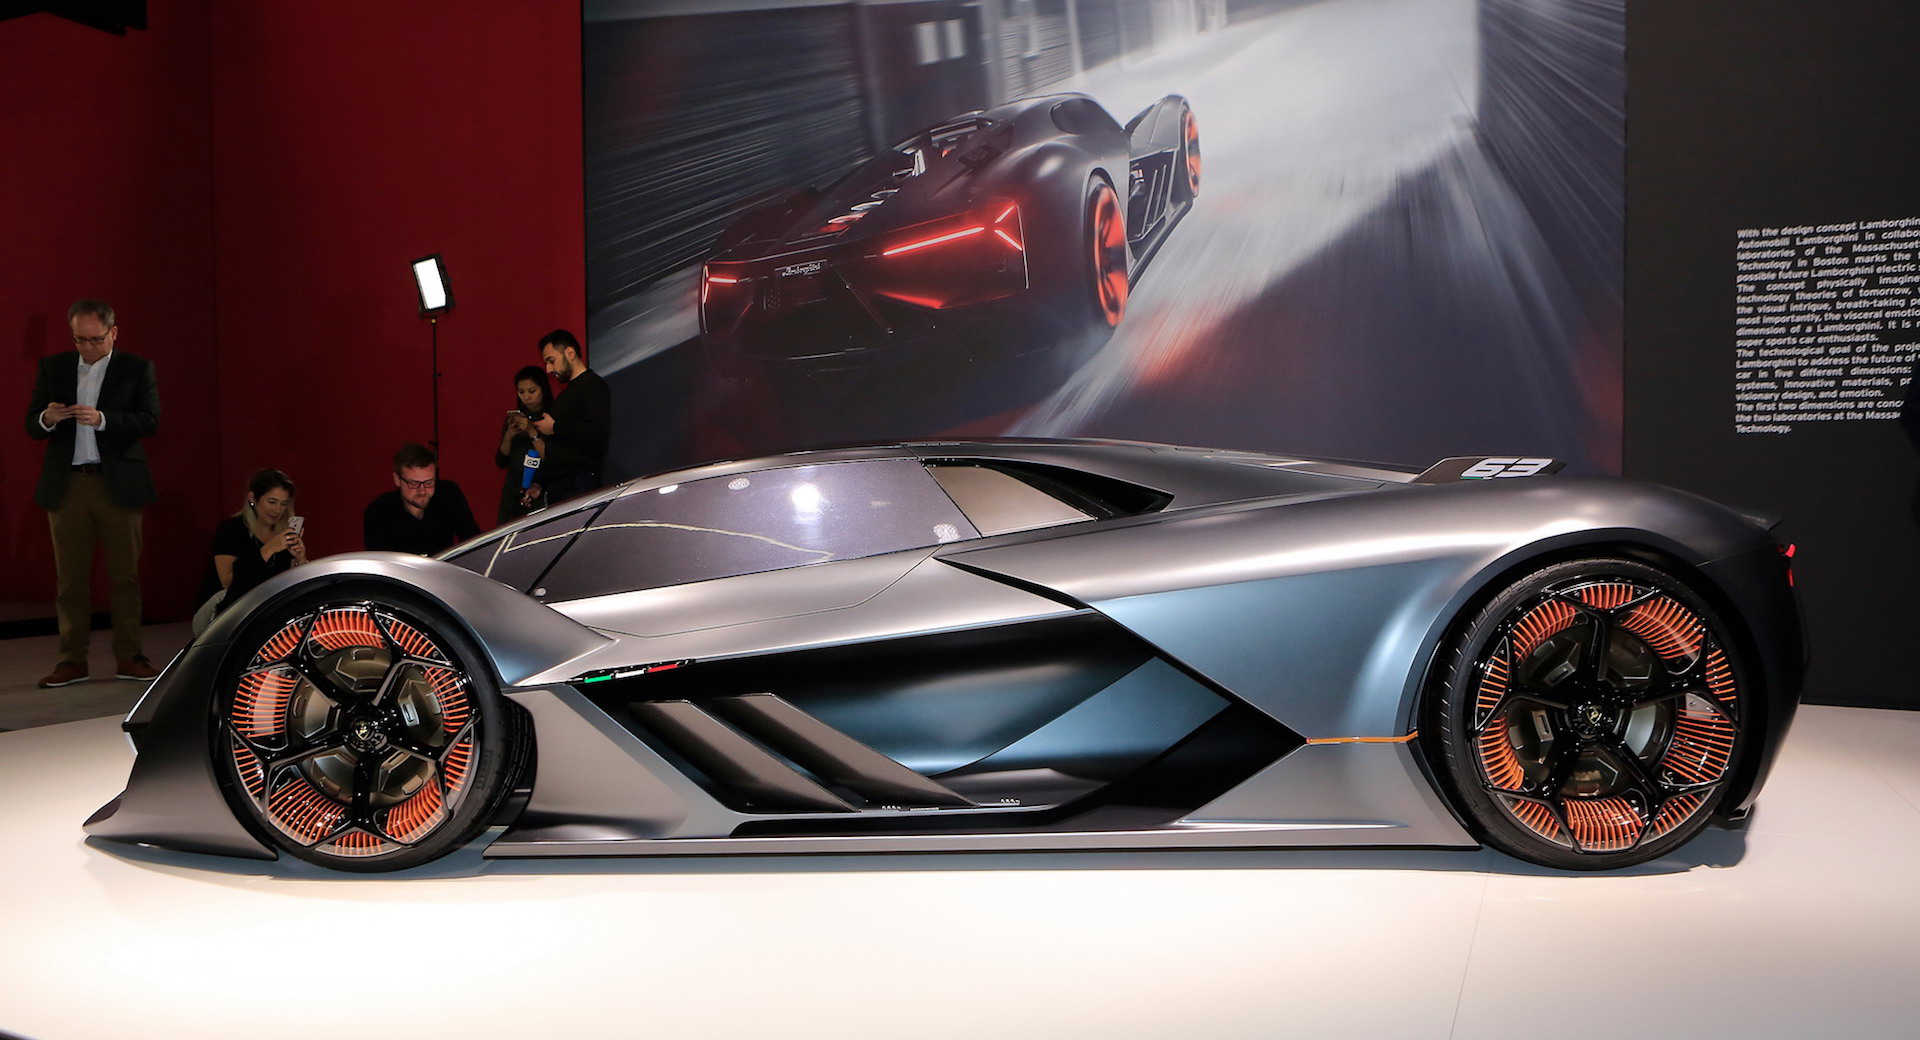 What are your thoughts on the Lamborghini Terzo Millennio? - Quora